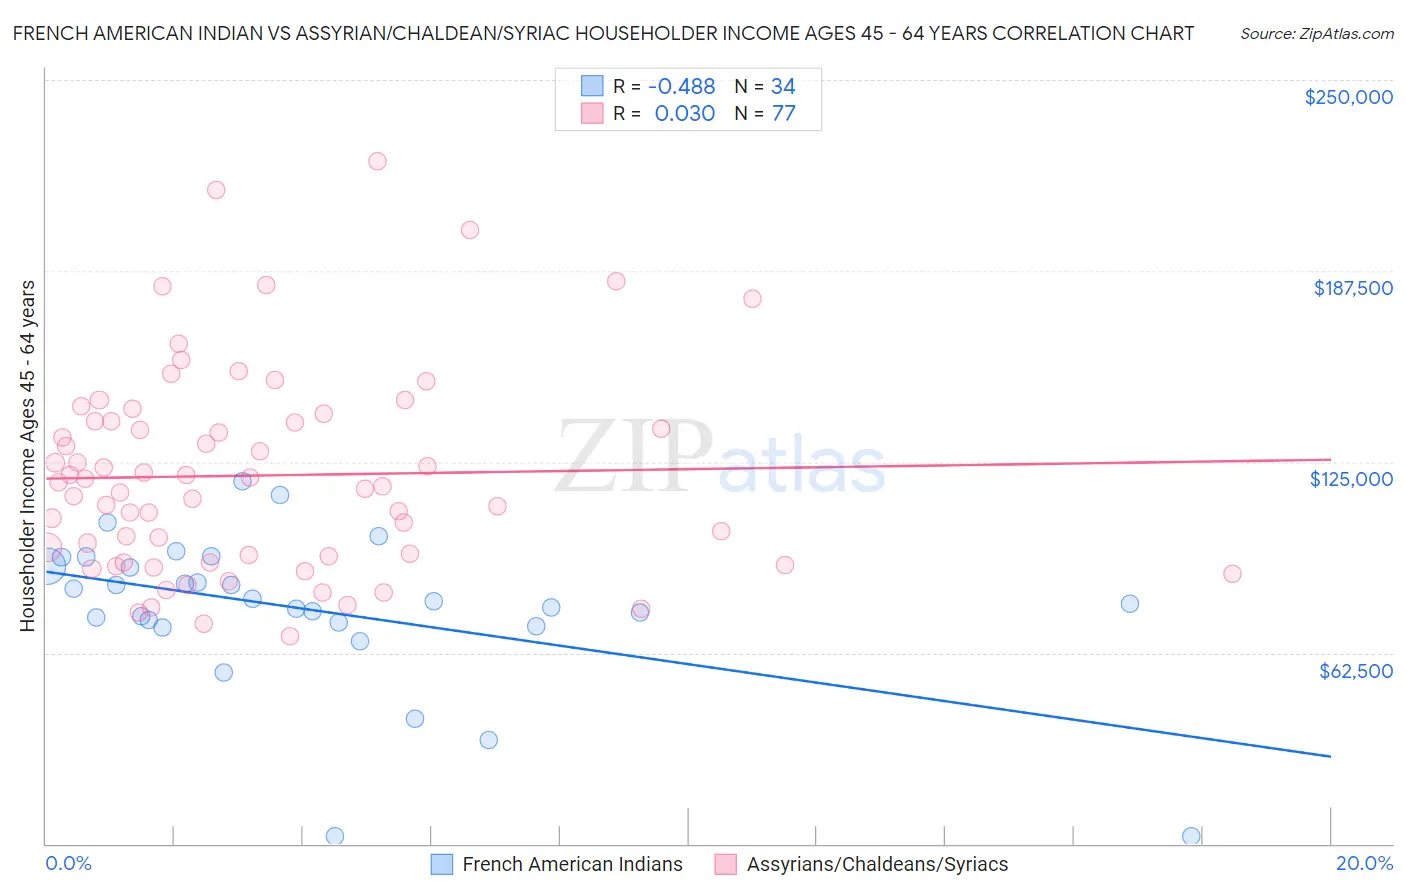 French American Indian vs Assyrian/Chaldean/Syriac Householder Income Ages 45 - 64 years